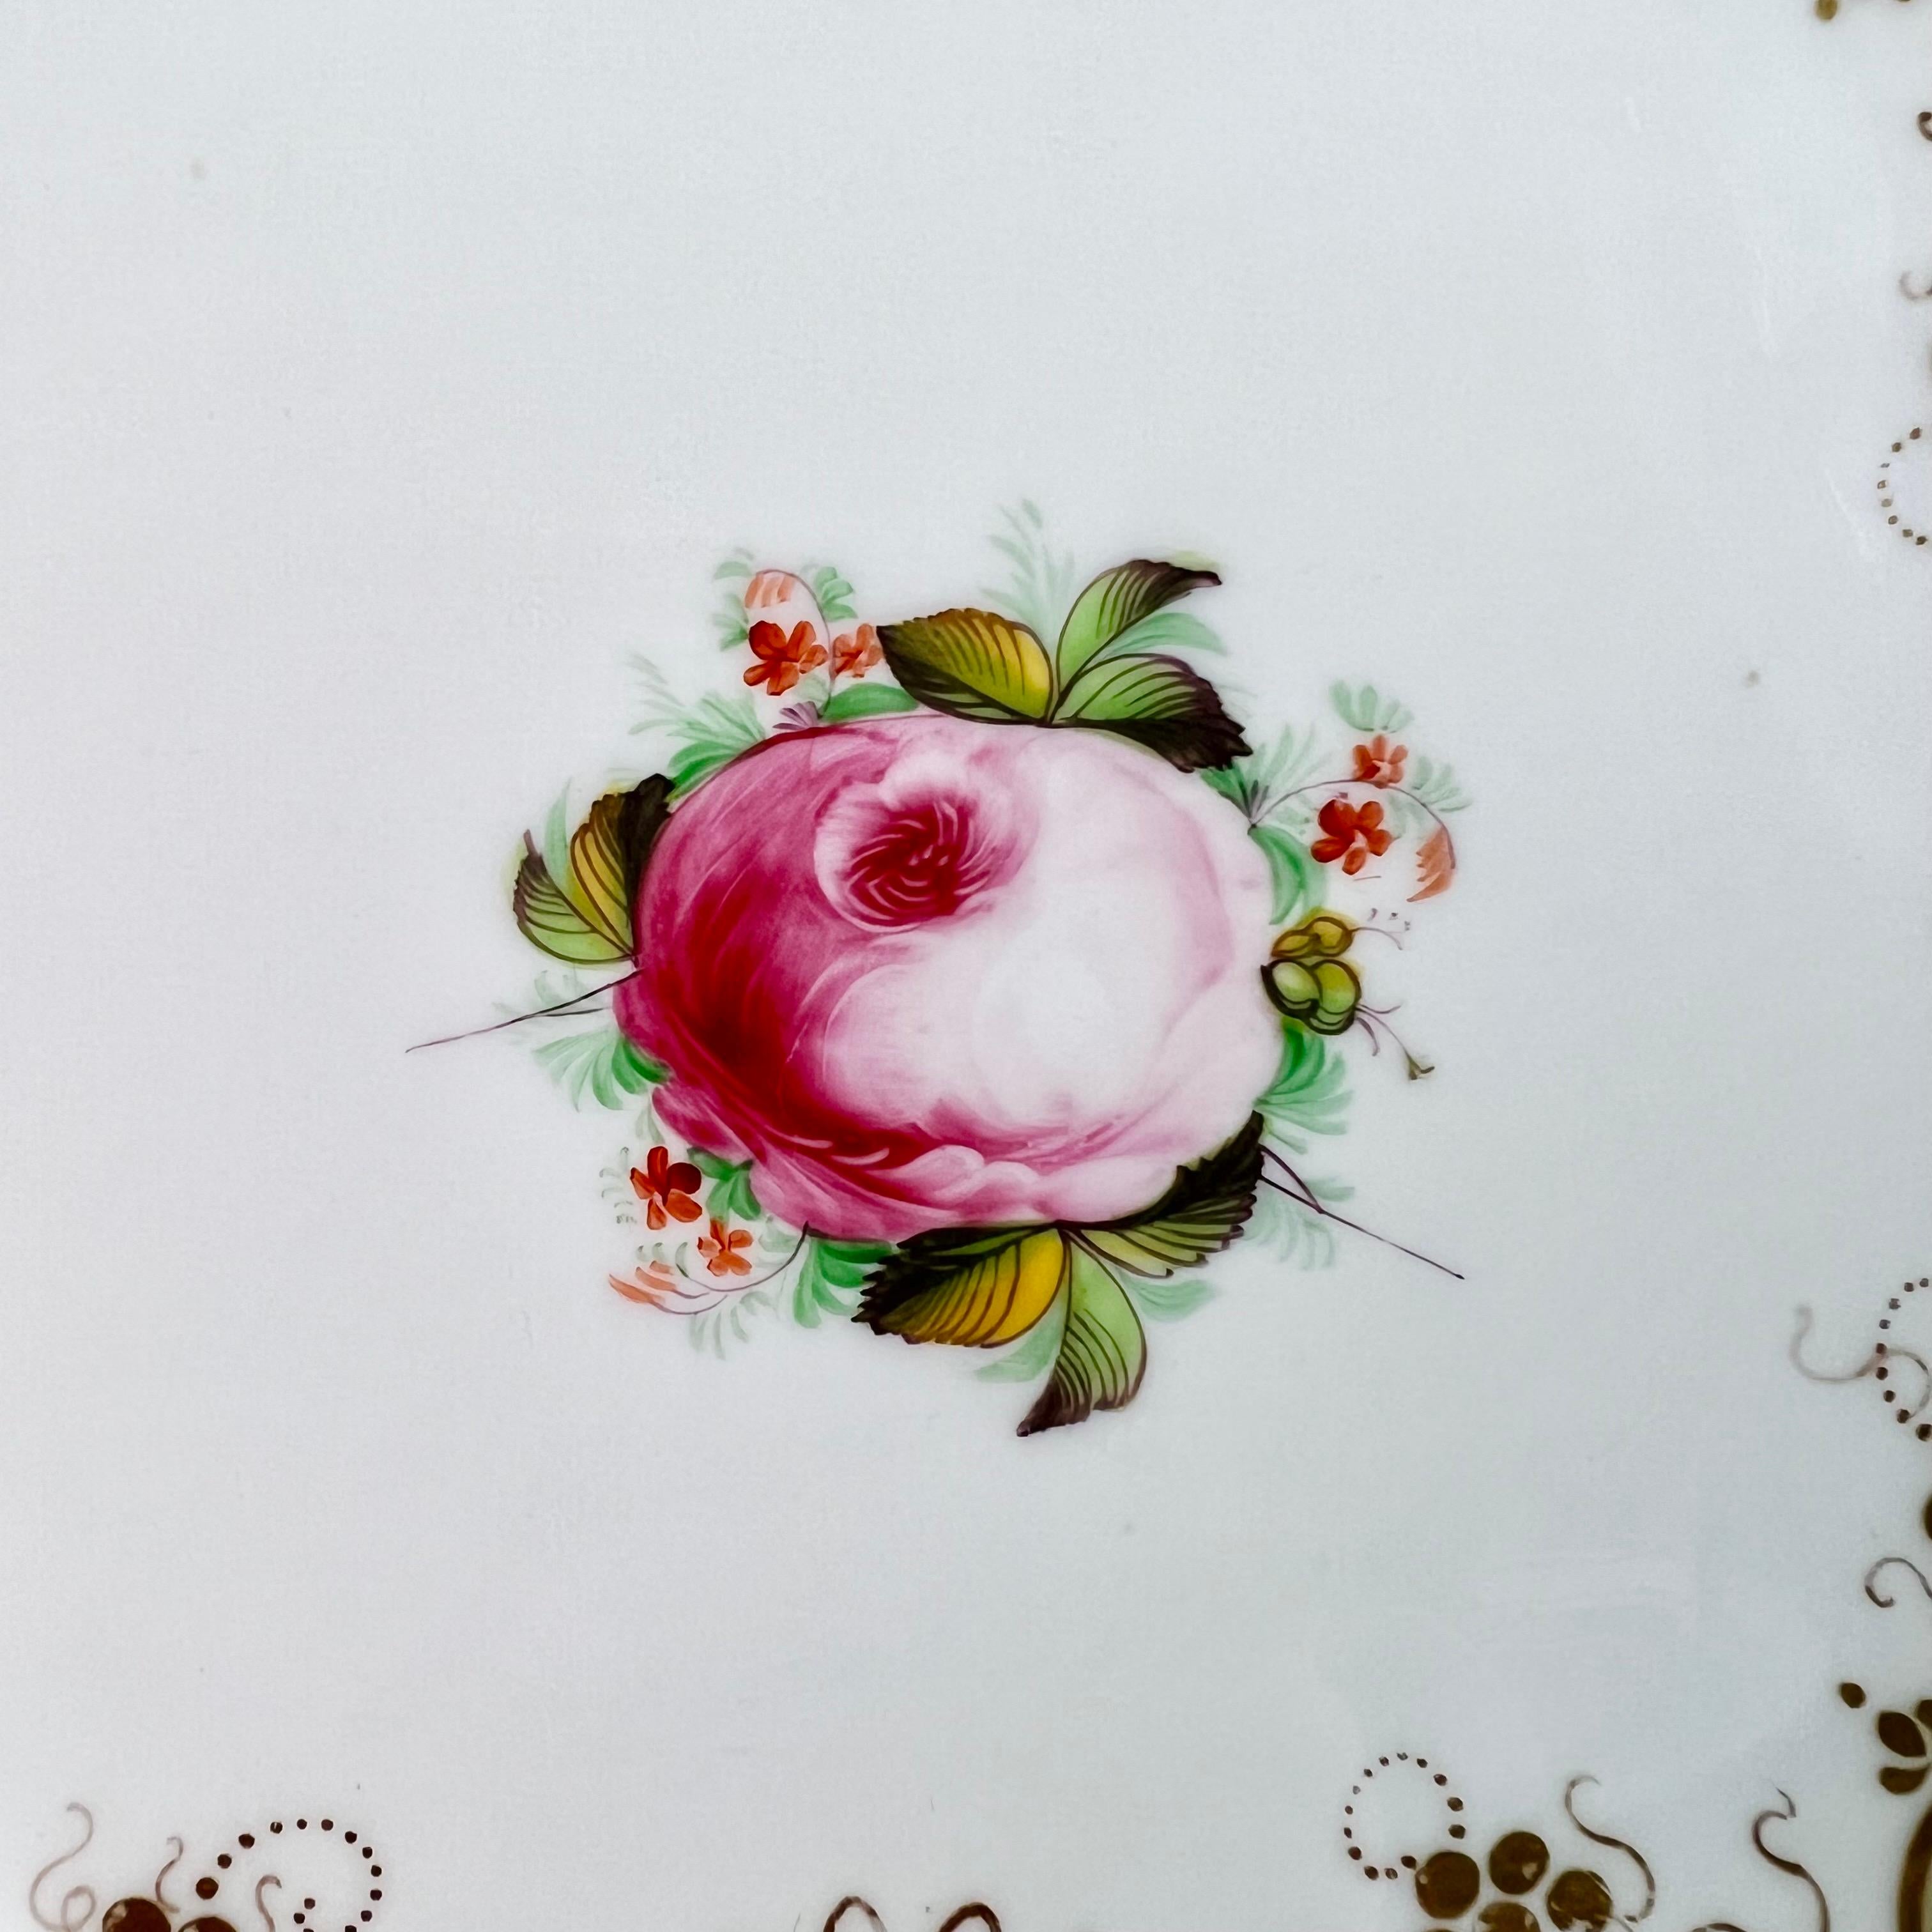 Rococo Revival Hilditch Porcelain Cake Plate, Beige, Gilt and Pink Cabbage Rose, ca 1830 For Sale